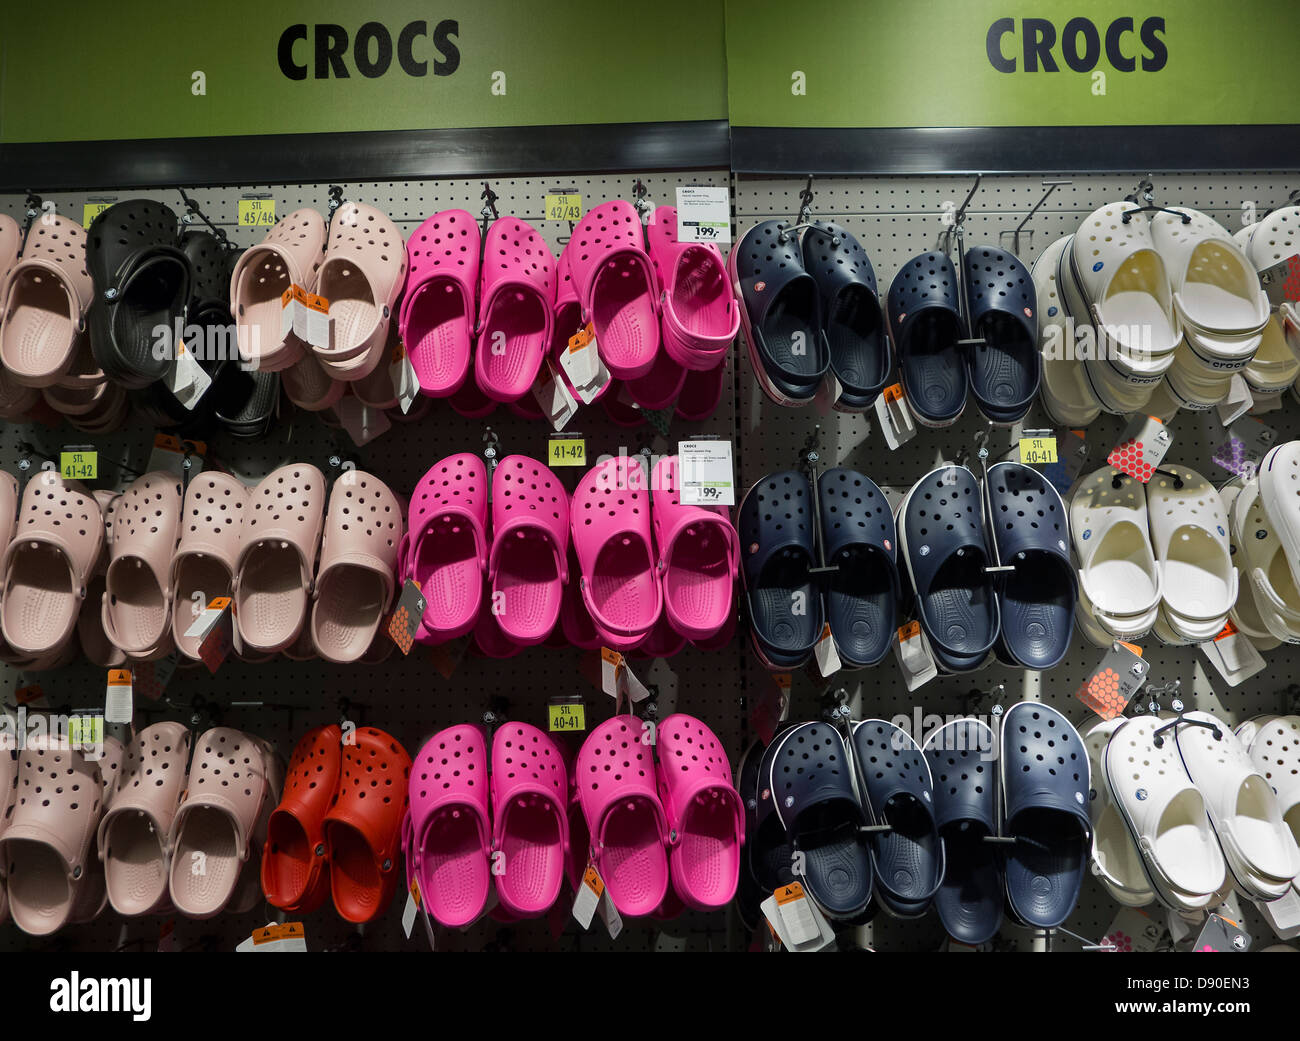 Crocs Shop High Resolution Stock Photography and Images - Alamy